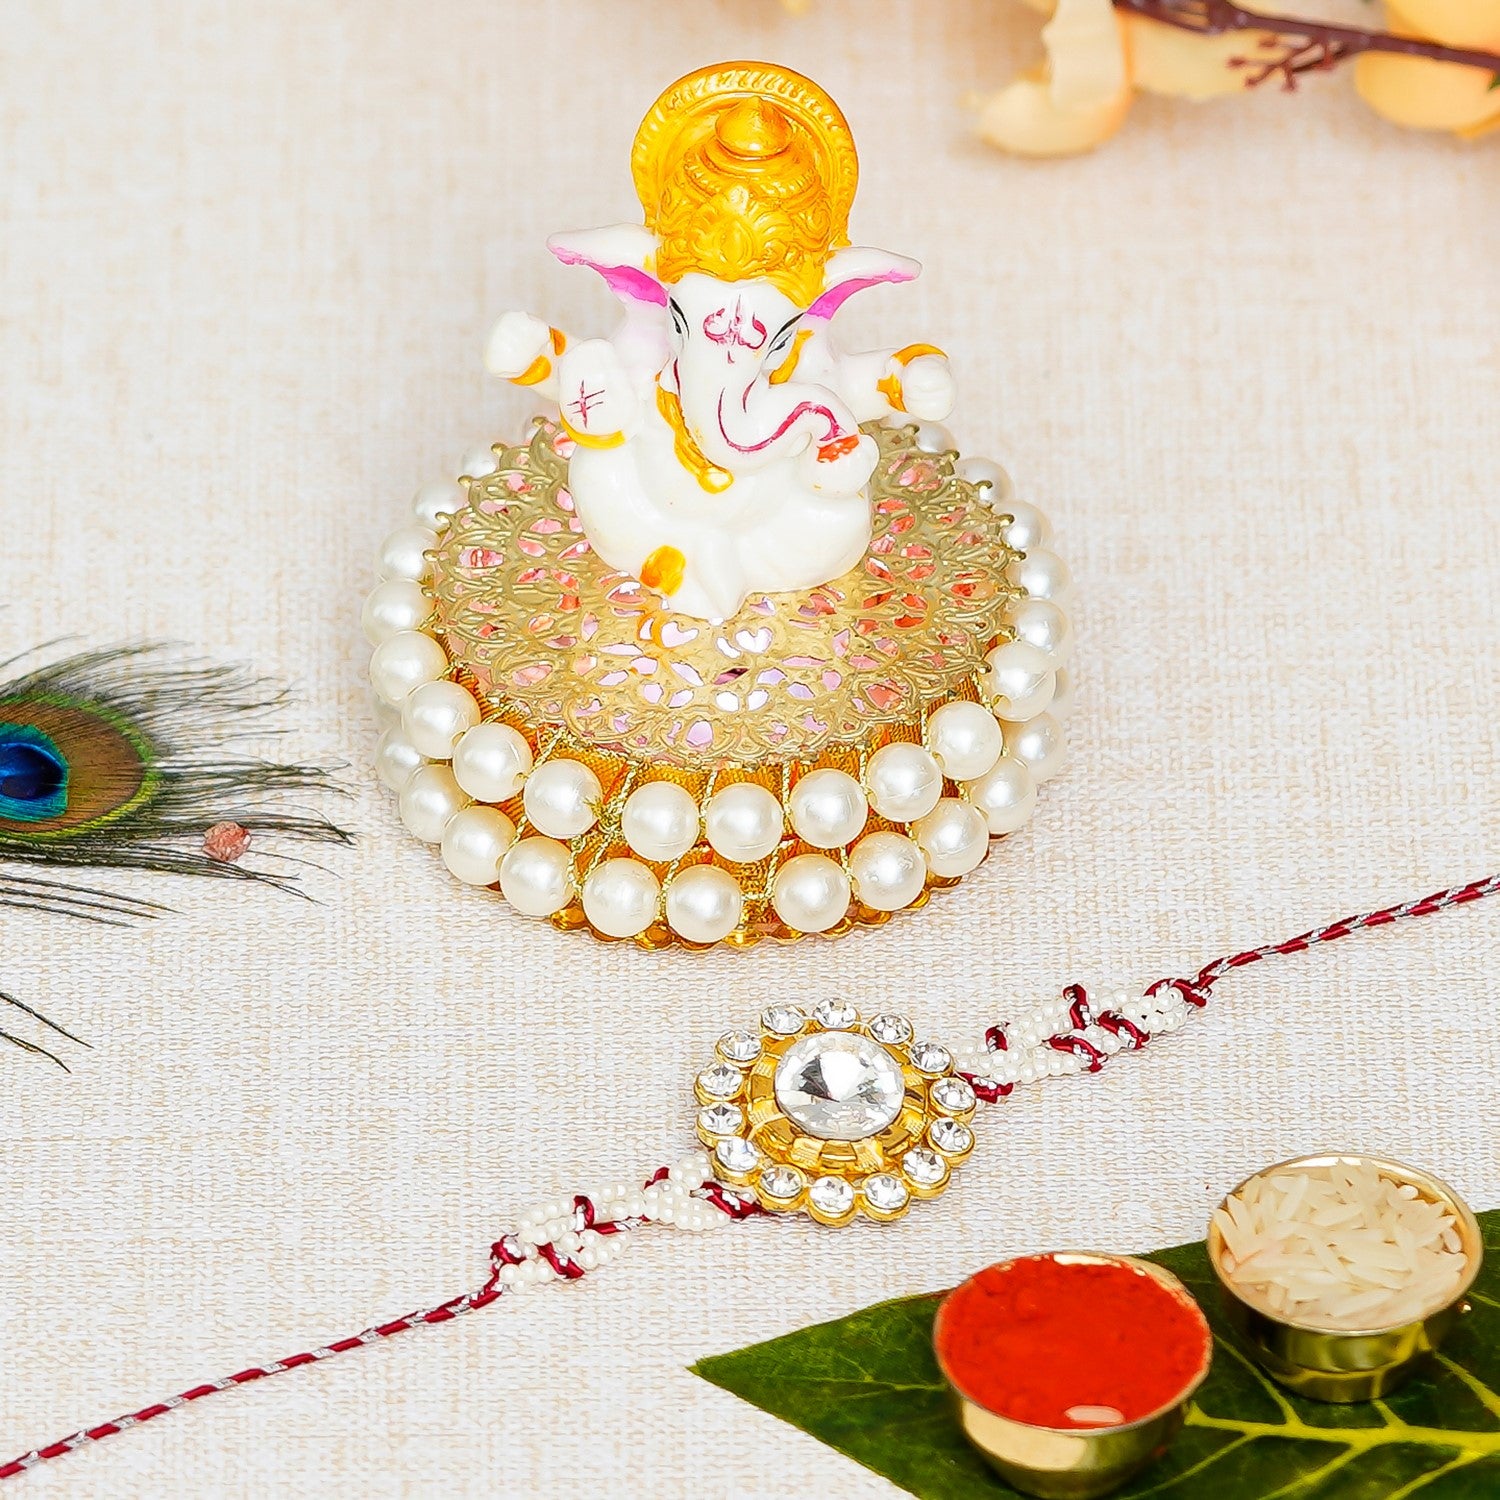 Designer  Handcrafted Rakhi with Lord Ganesha Idol on Decorative Handcrafted Plate for Home and Car and Roli Chawal Pack